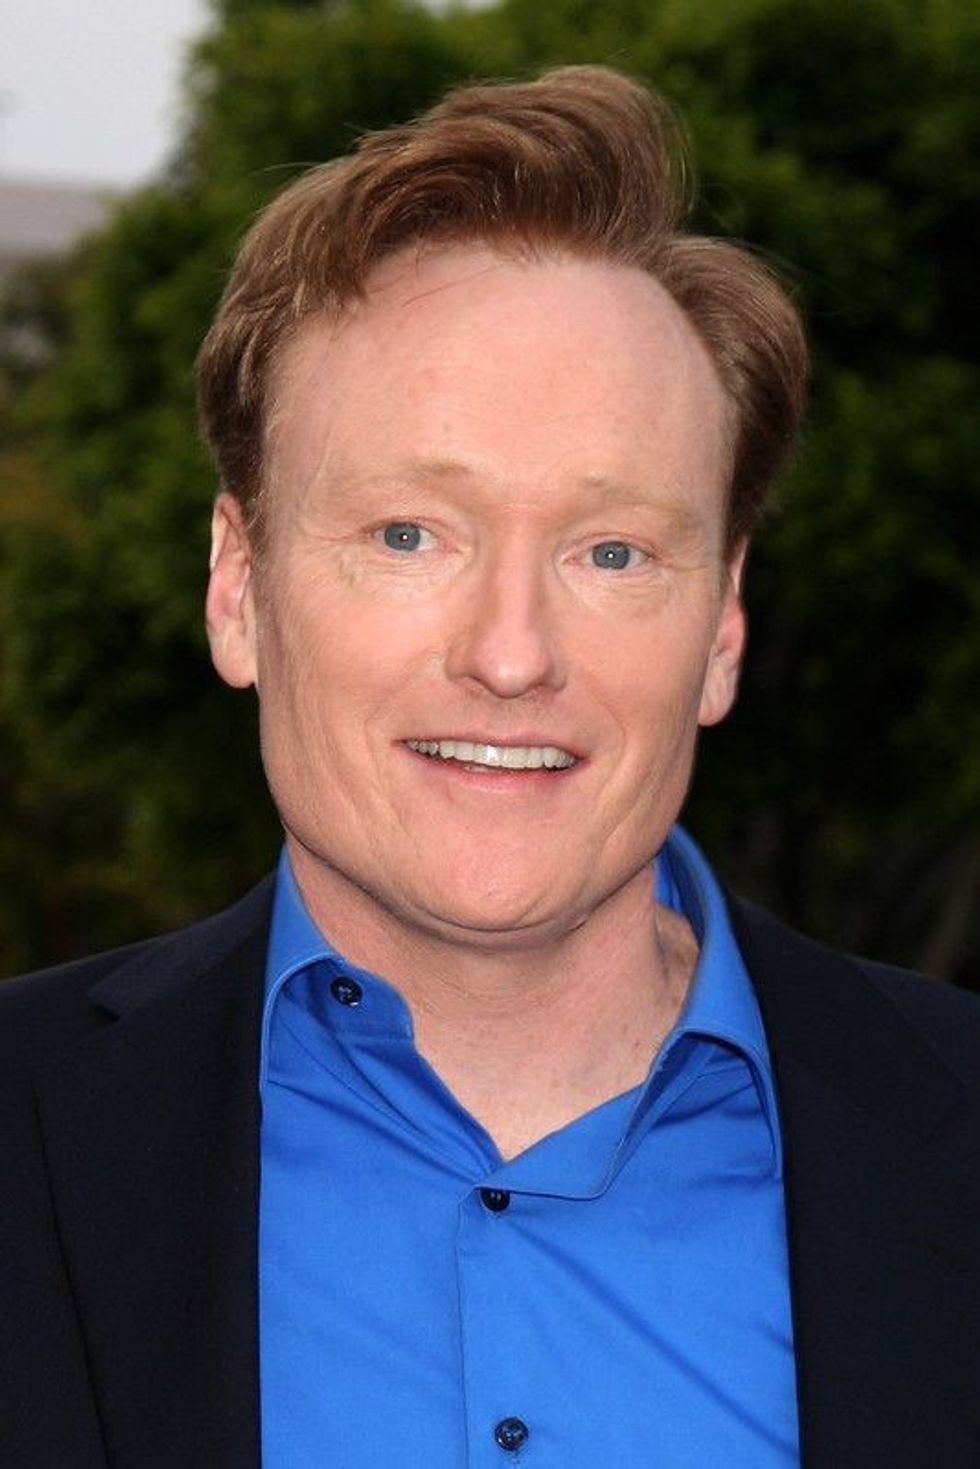 75 Conan O' Brien Quotes From the Famous Television Host | Kidadl